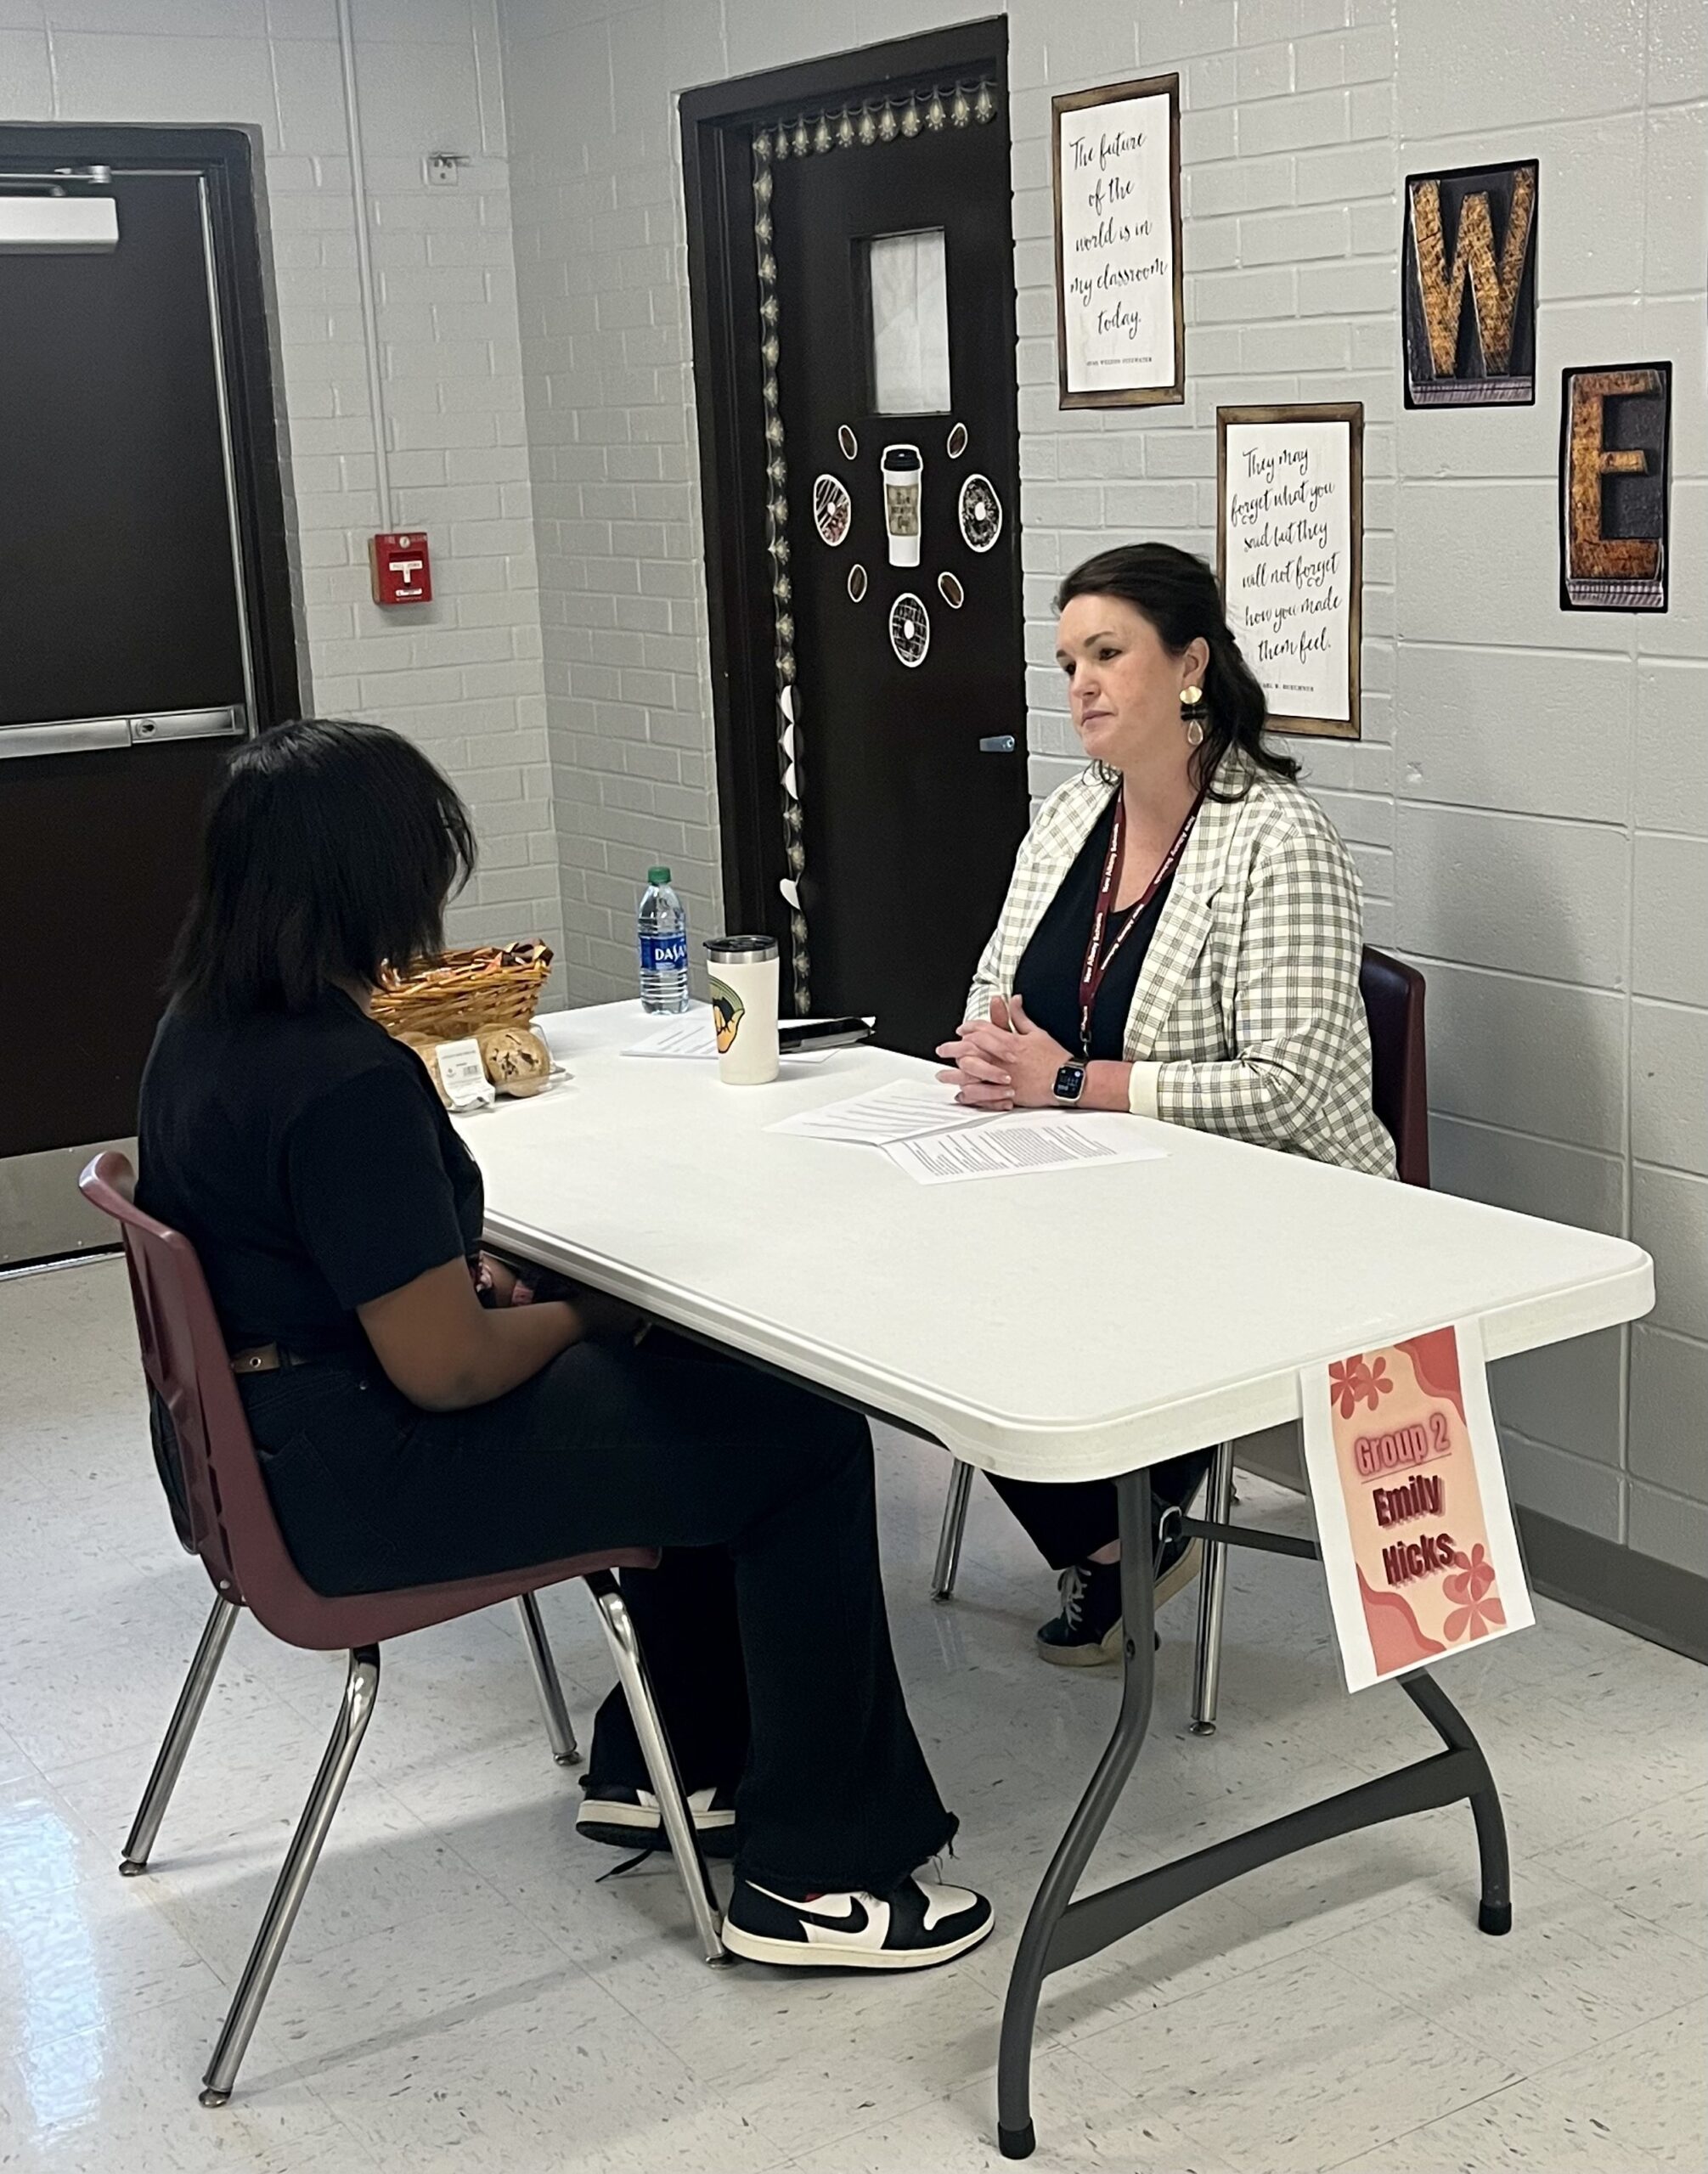 During the week of February 13, New Albany Middle School Career Coach, Emily Hicks, met with all 8th graders to discuss manners, how to shake a hand, eye contact, and good communication skills. On February 17, all 8th grade students are participating in mock interviews. Special thanks to the New Albany/Union County Workforce Development Team and NAMS teachers for helping conduct interviews.